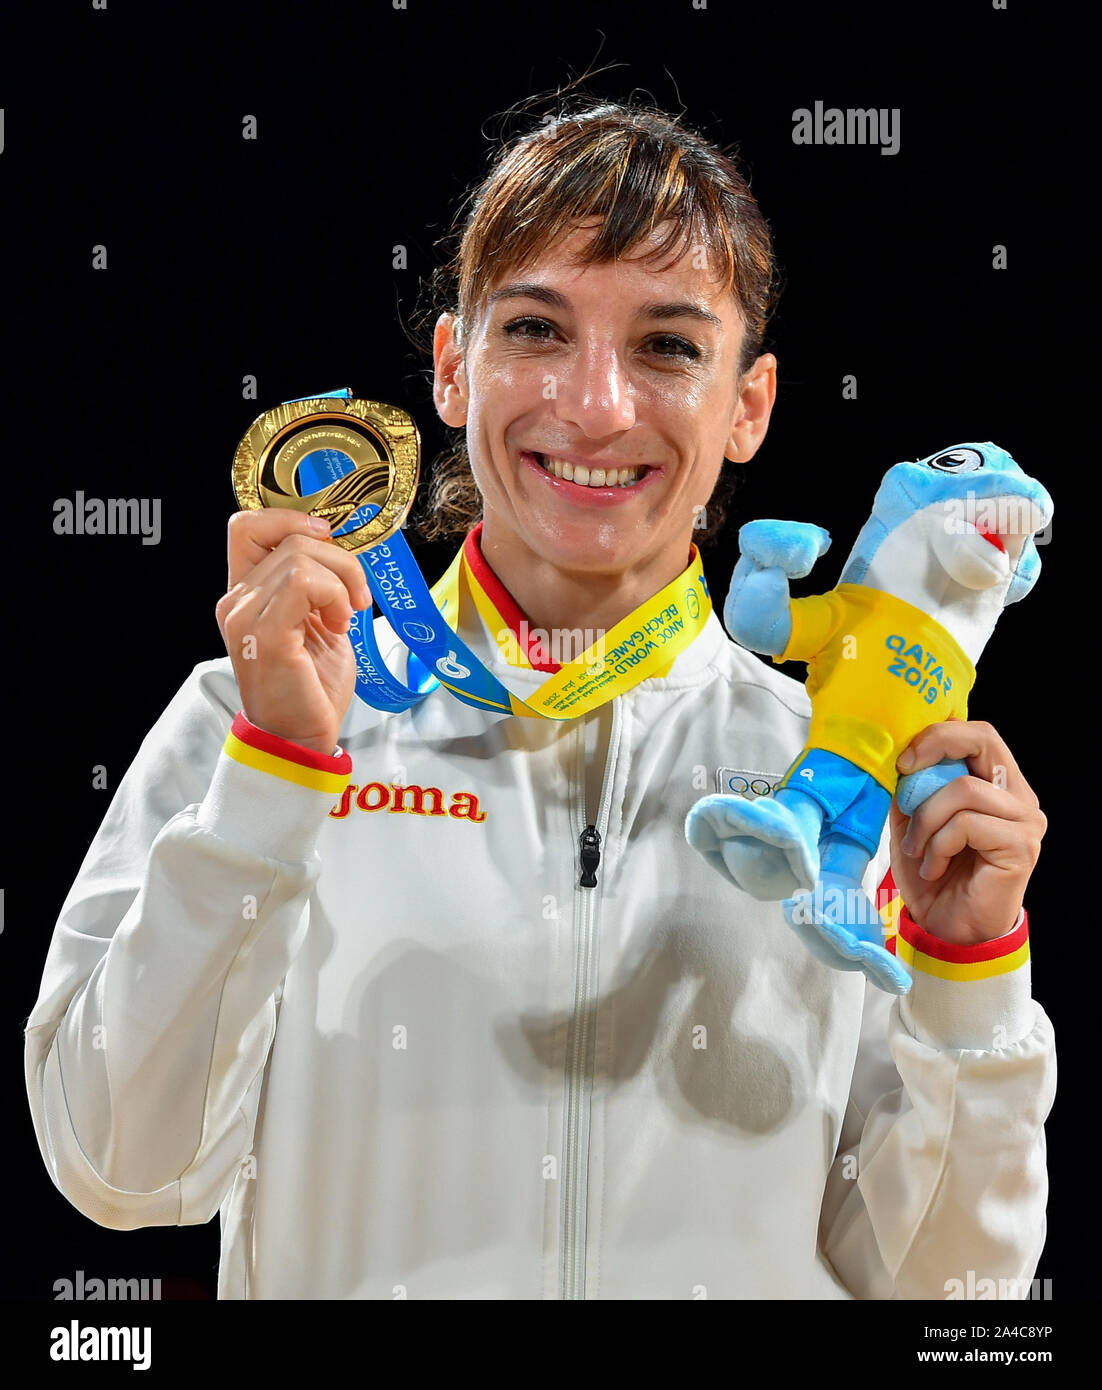 Doha, Qatar. 13th Oct, 2019. Sandra Sanchez of Spain poses for photos during the medal ceremony of women's individual Kata event at the ANOC World Beach Games in Doha, Qatar, Oct. 13, 2019. Credit: Nikku/Xinhua/Alamy Live News Stock Photo